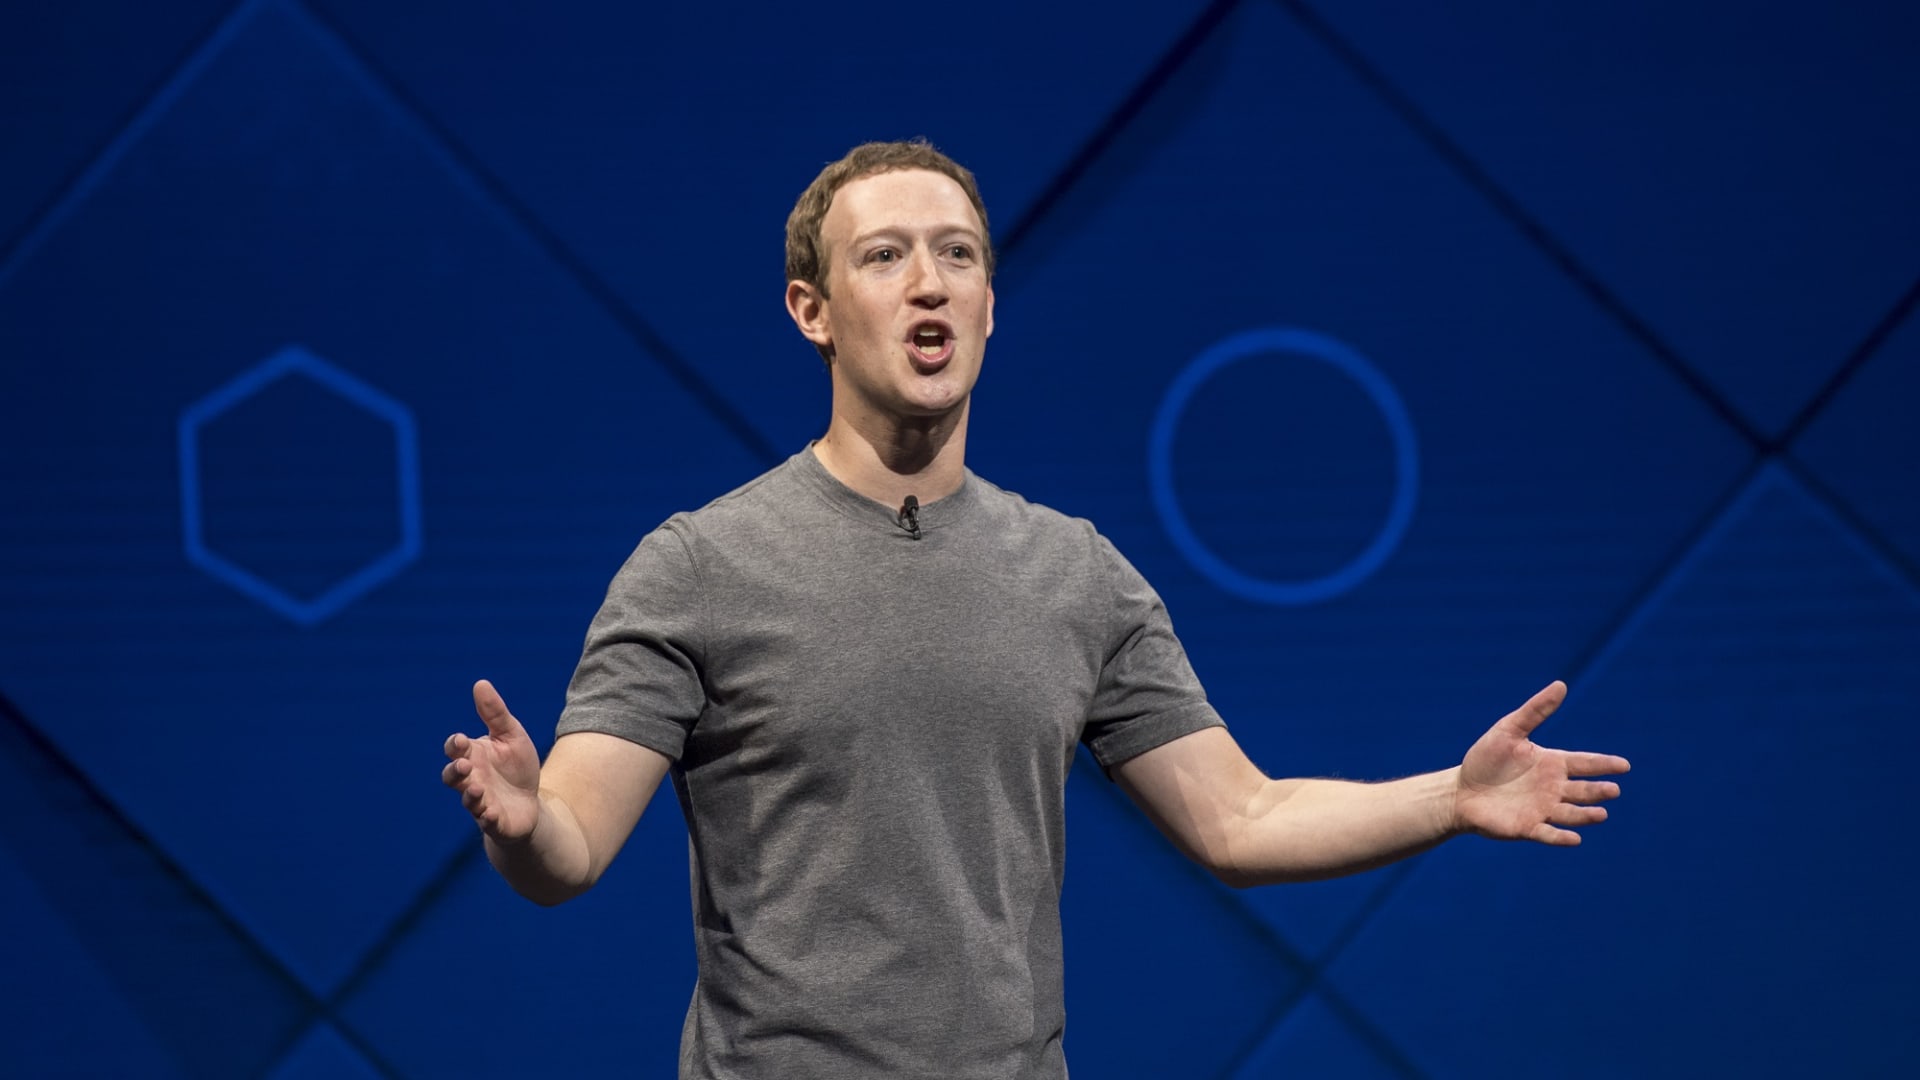 Facebook tells Congress it shouldn't be broken up because Instagram and WhatsApp have thrived